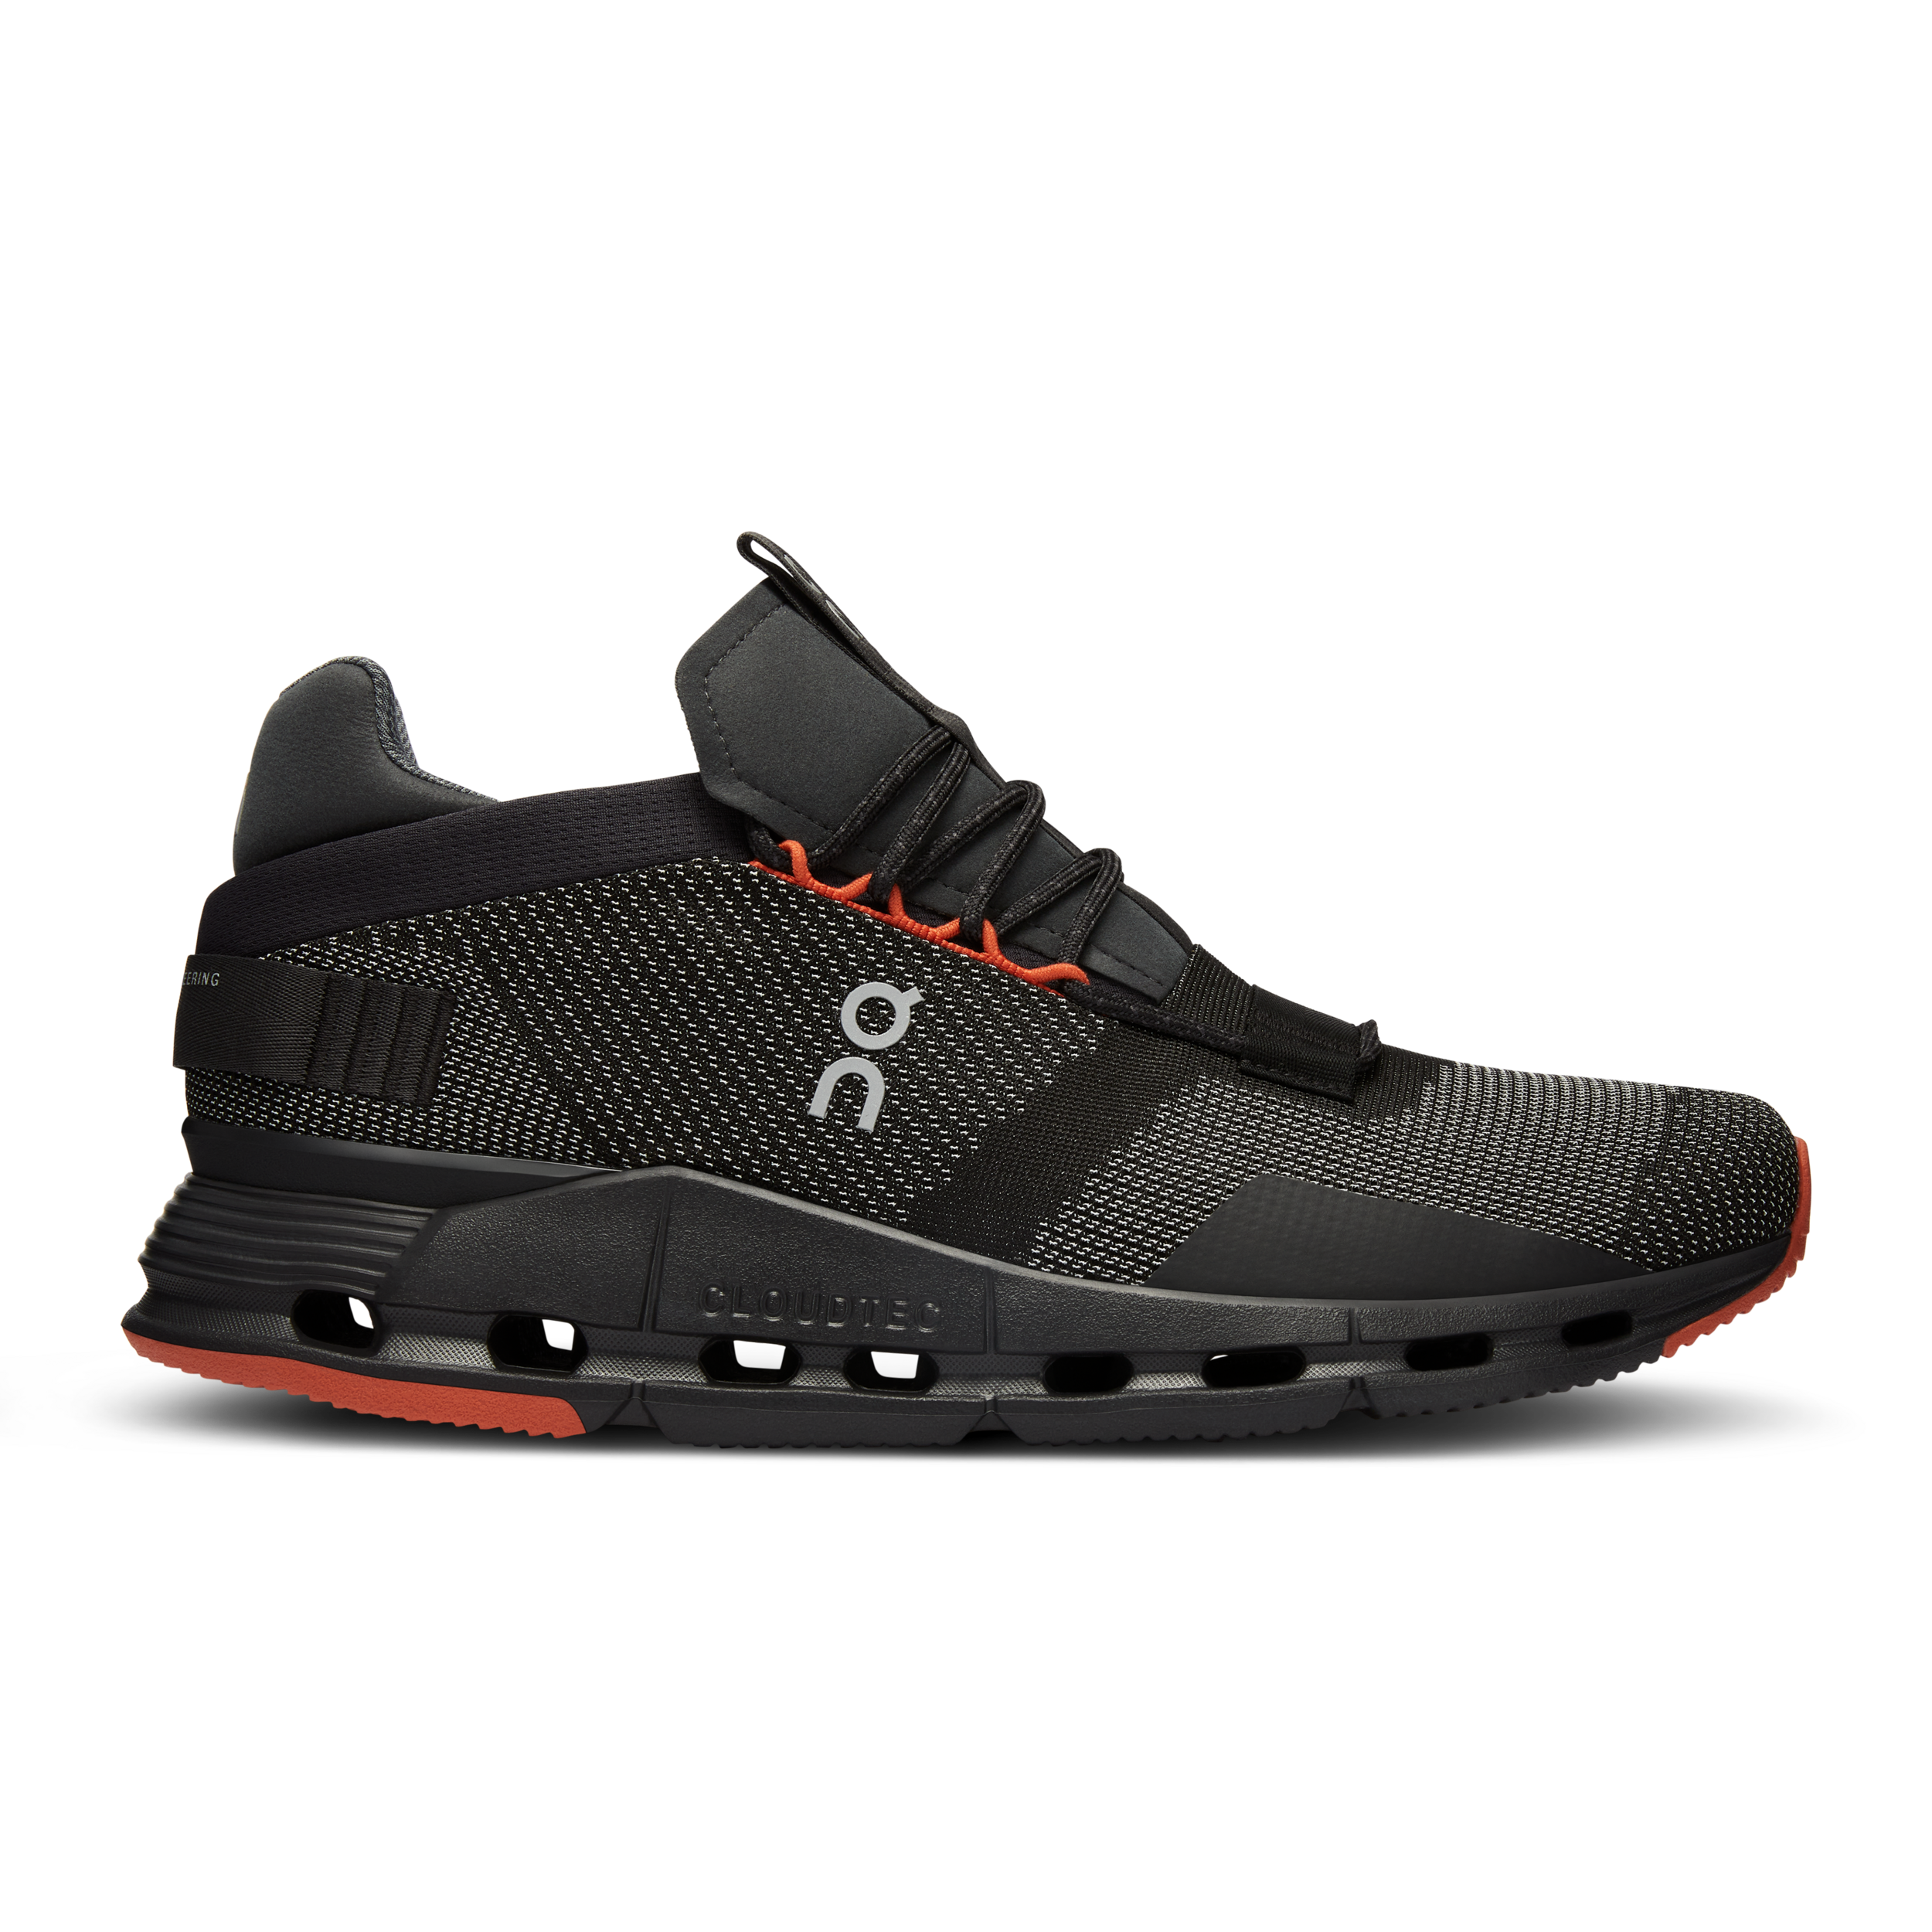 Lateral view of the Men's Cloudnova in Black/Flame